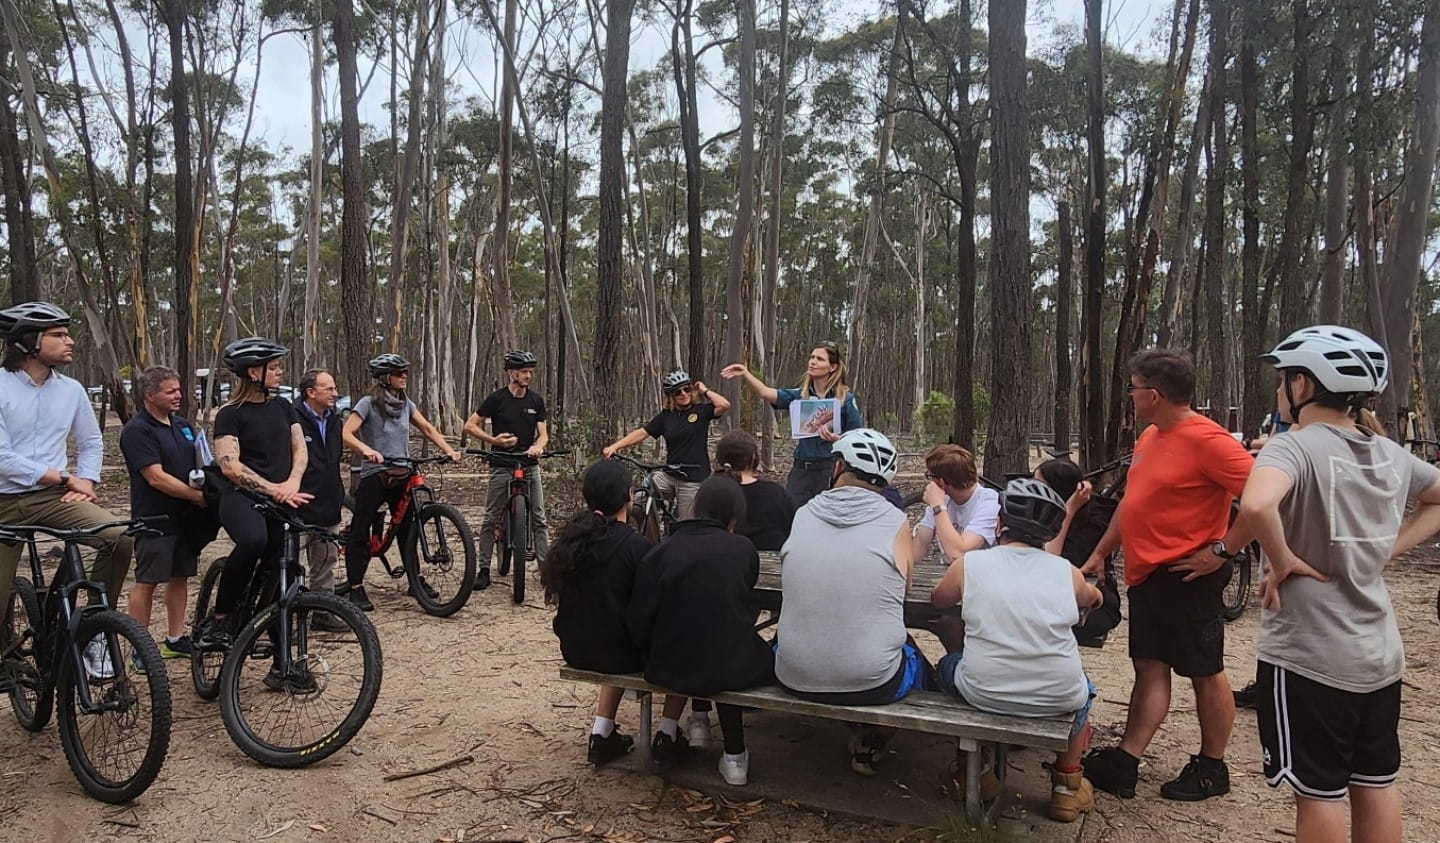 A group of people prepares to mountain bike at You Yangs Regional Park